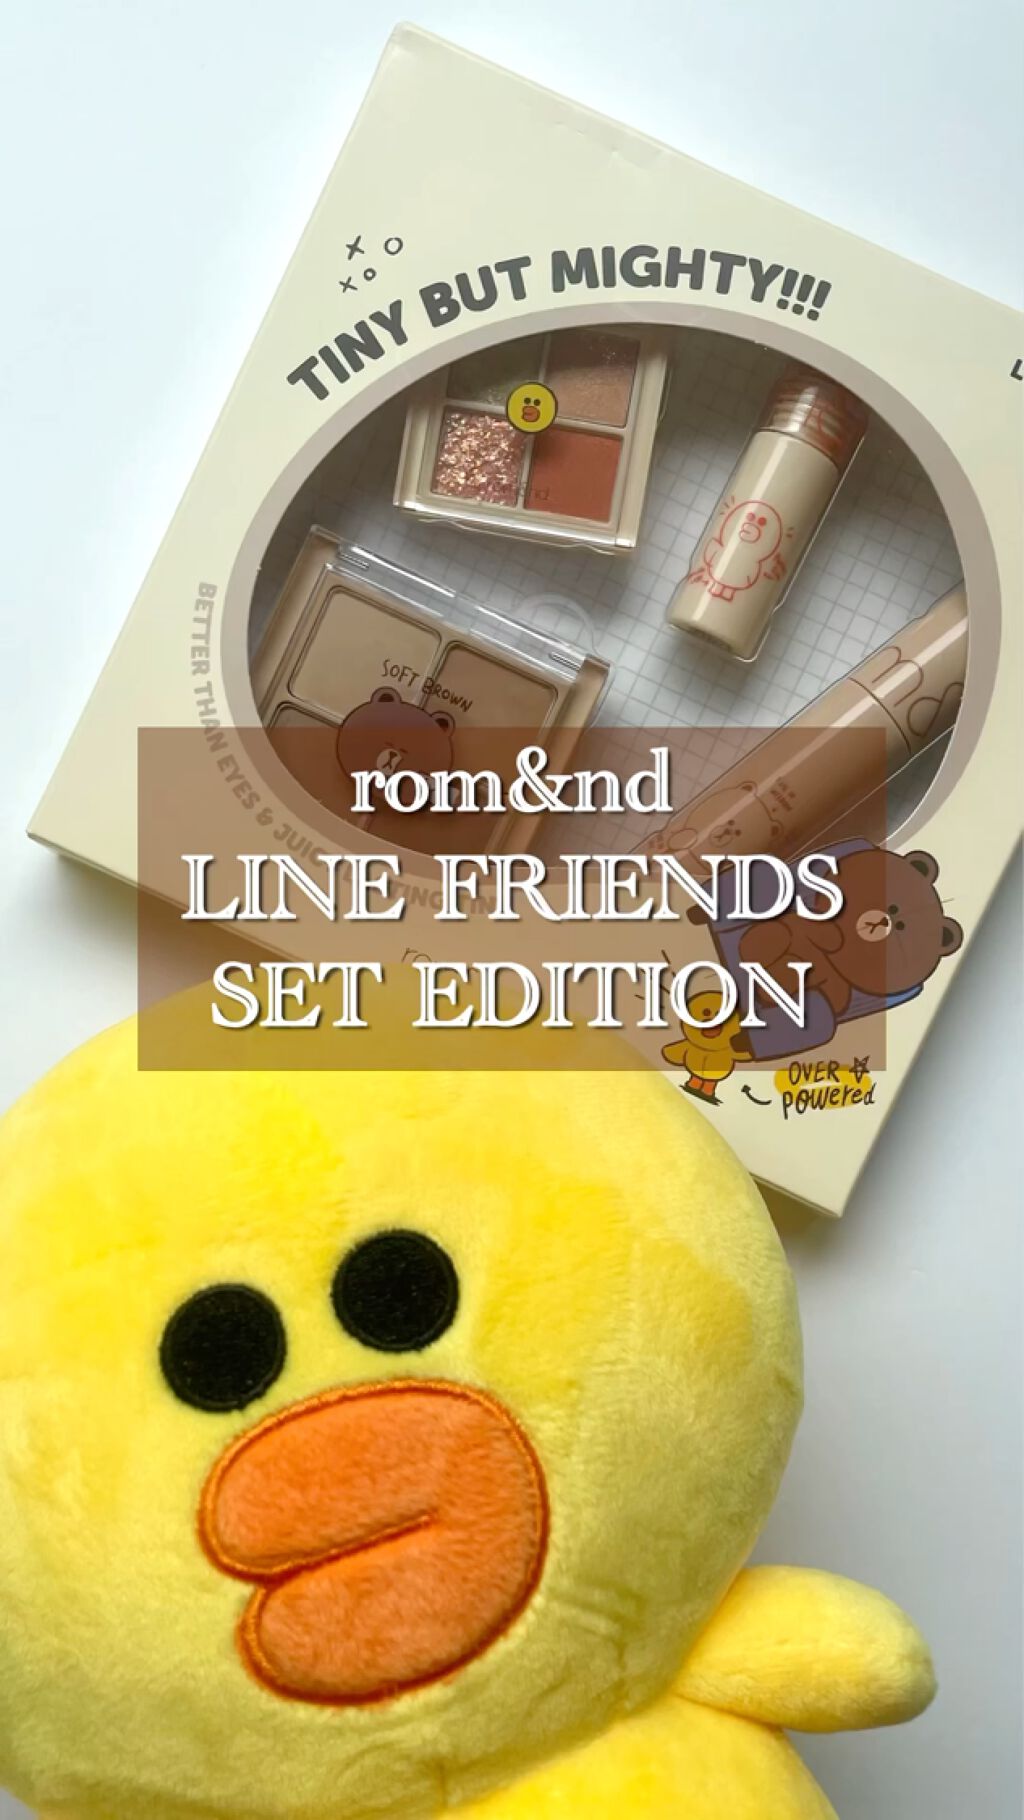 LINE FRIENDS EDITION/rom&nd/メイクアップキットの動画クチコミ5つ目